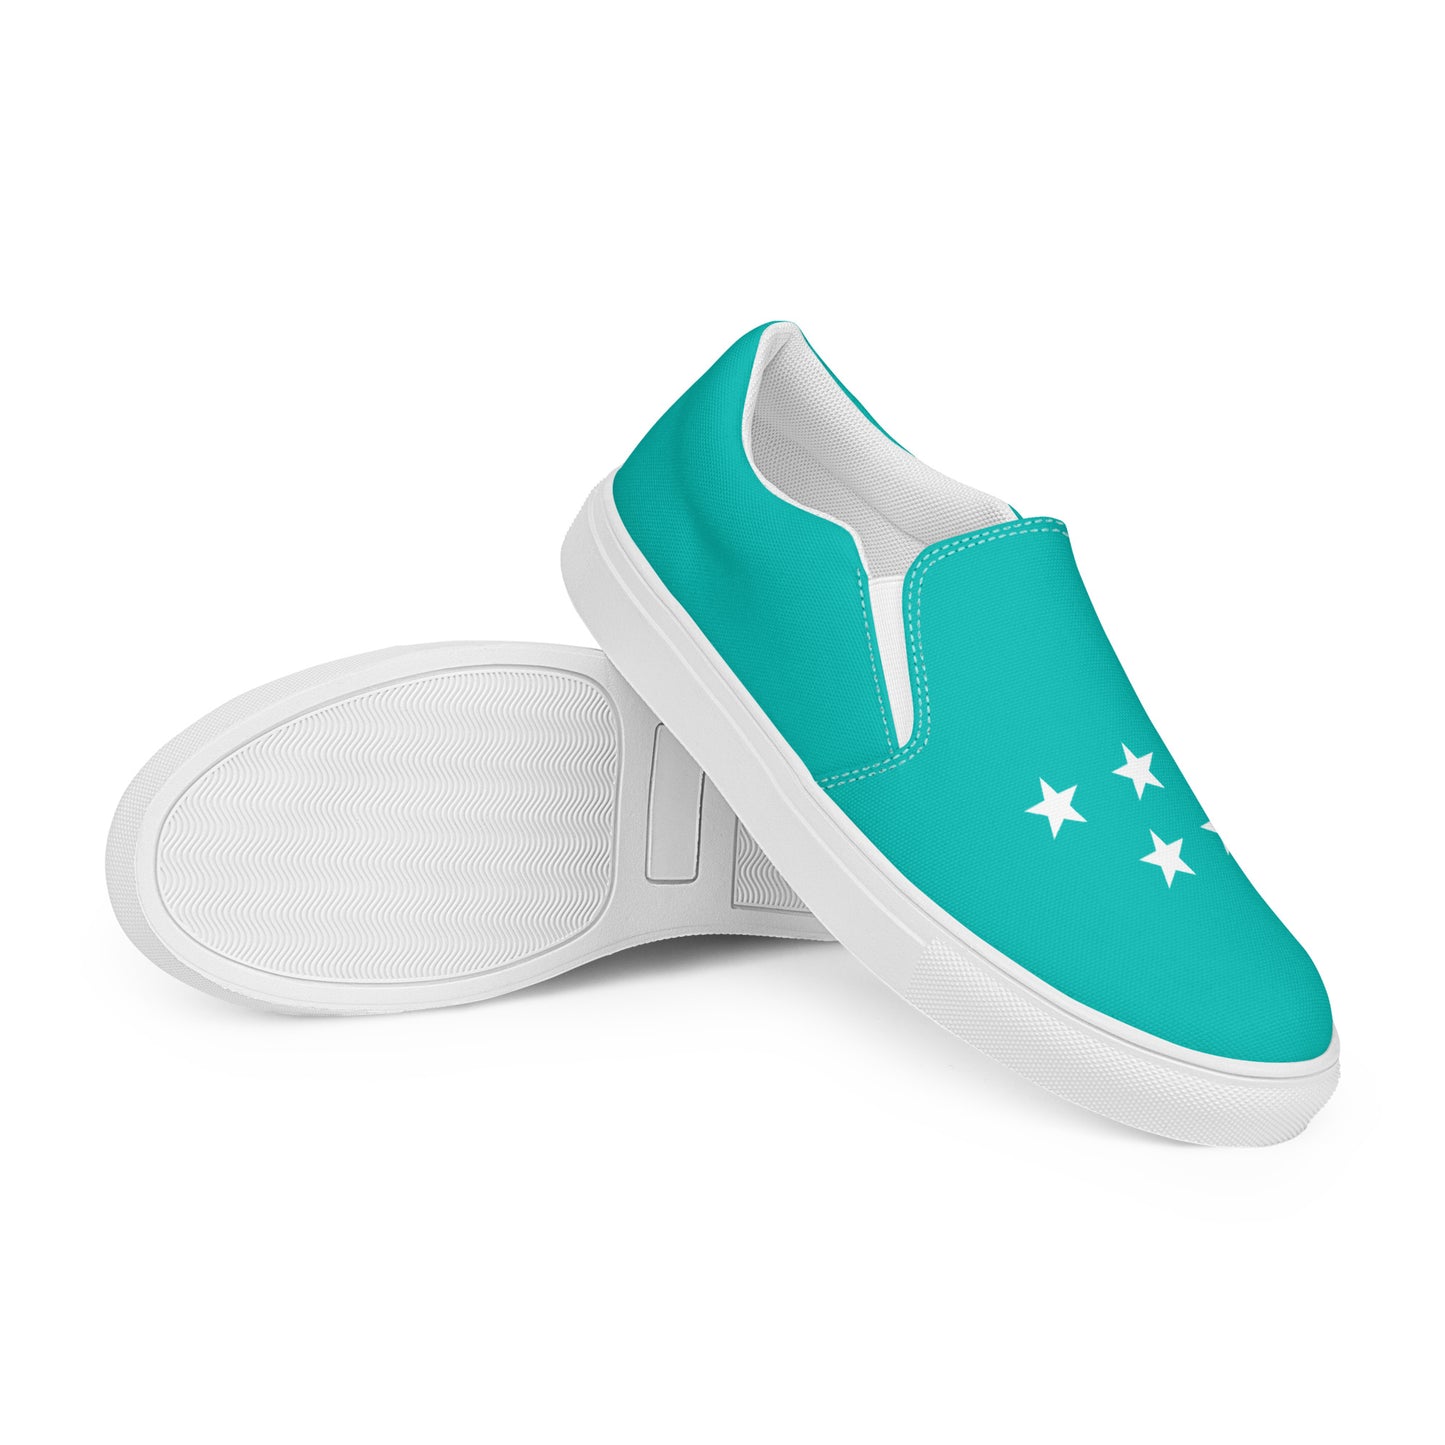 Starry - Inspired By Taylor Swift - Sustainably Made Women’s slip-on canvas shoes